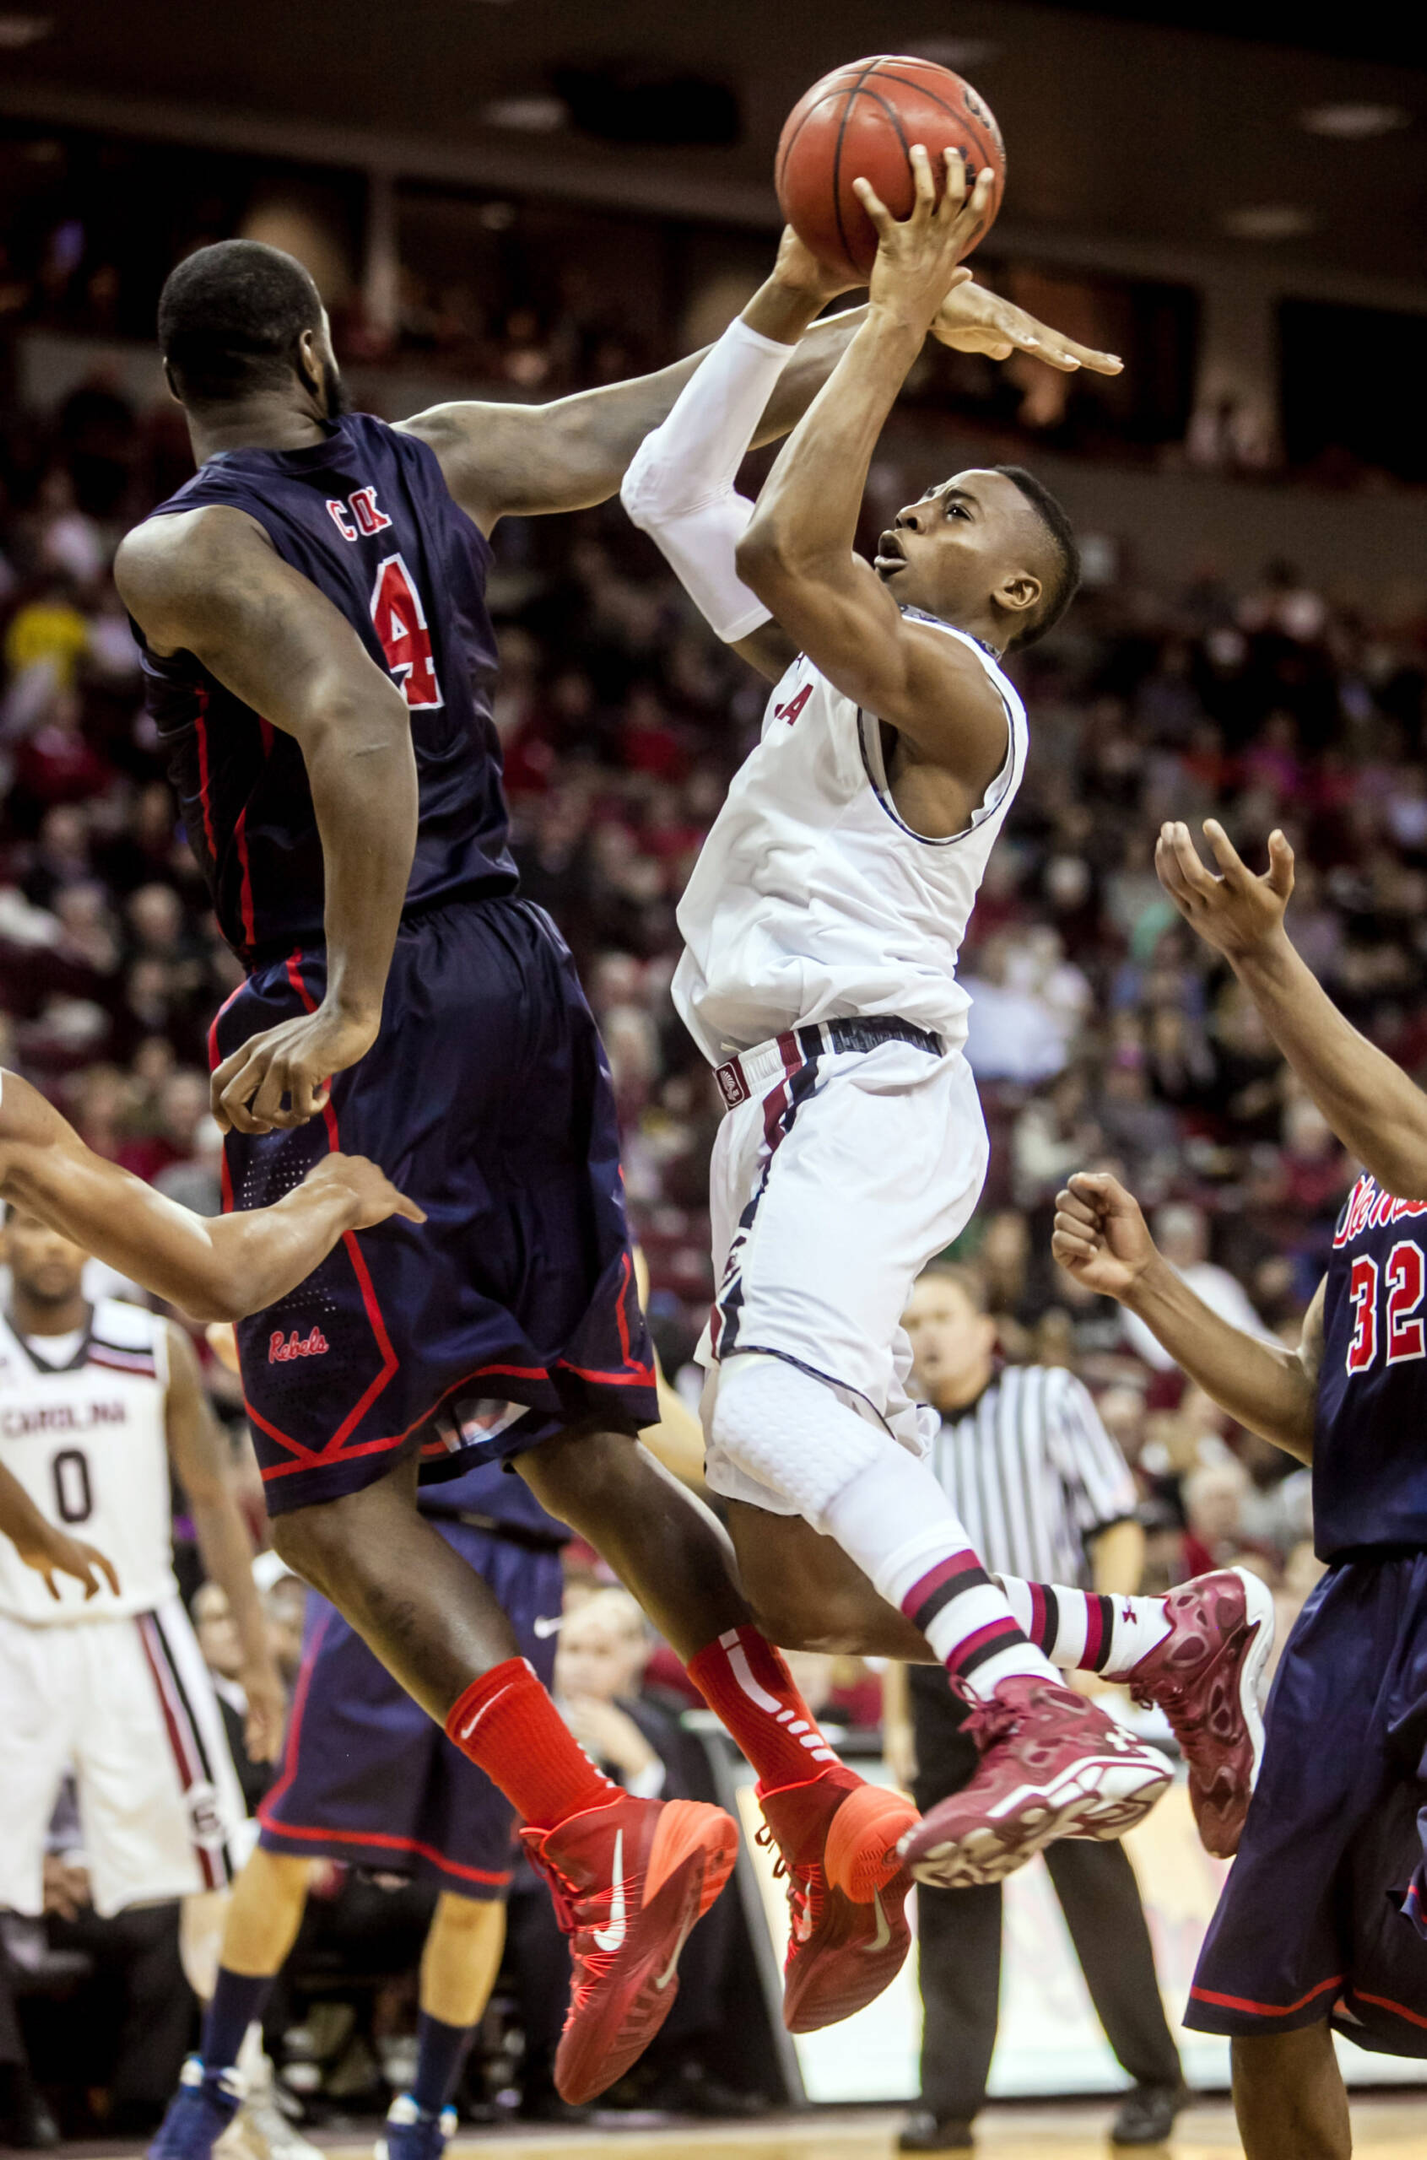 Gamecocks Fall 75-71 In Road Contest At Ole Miss